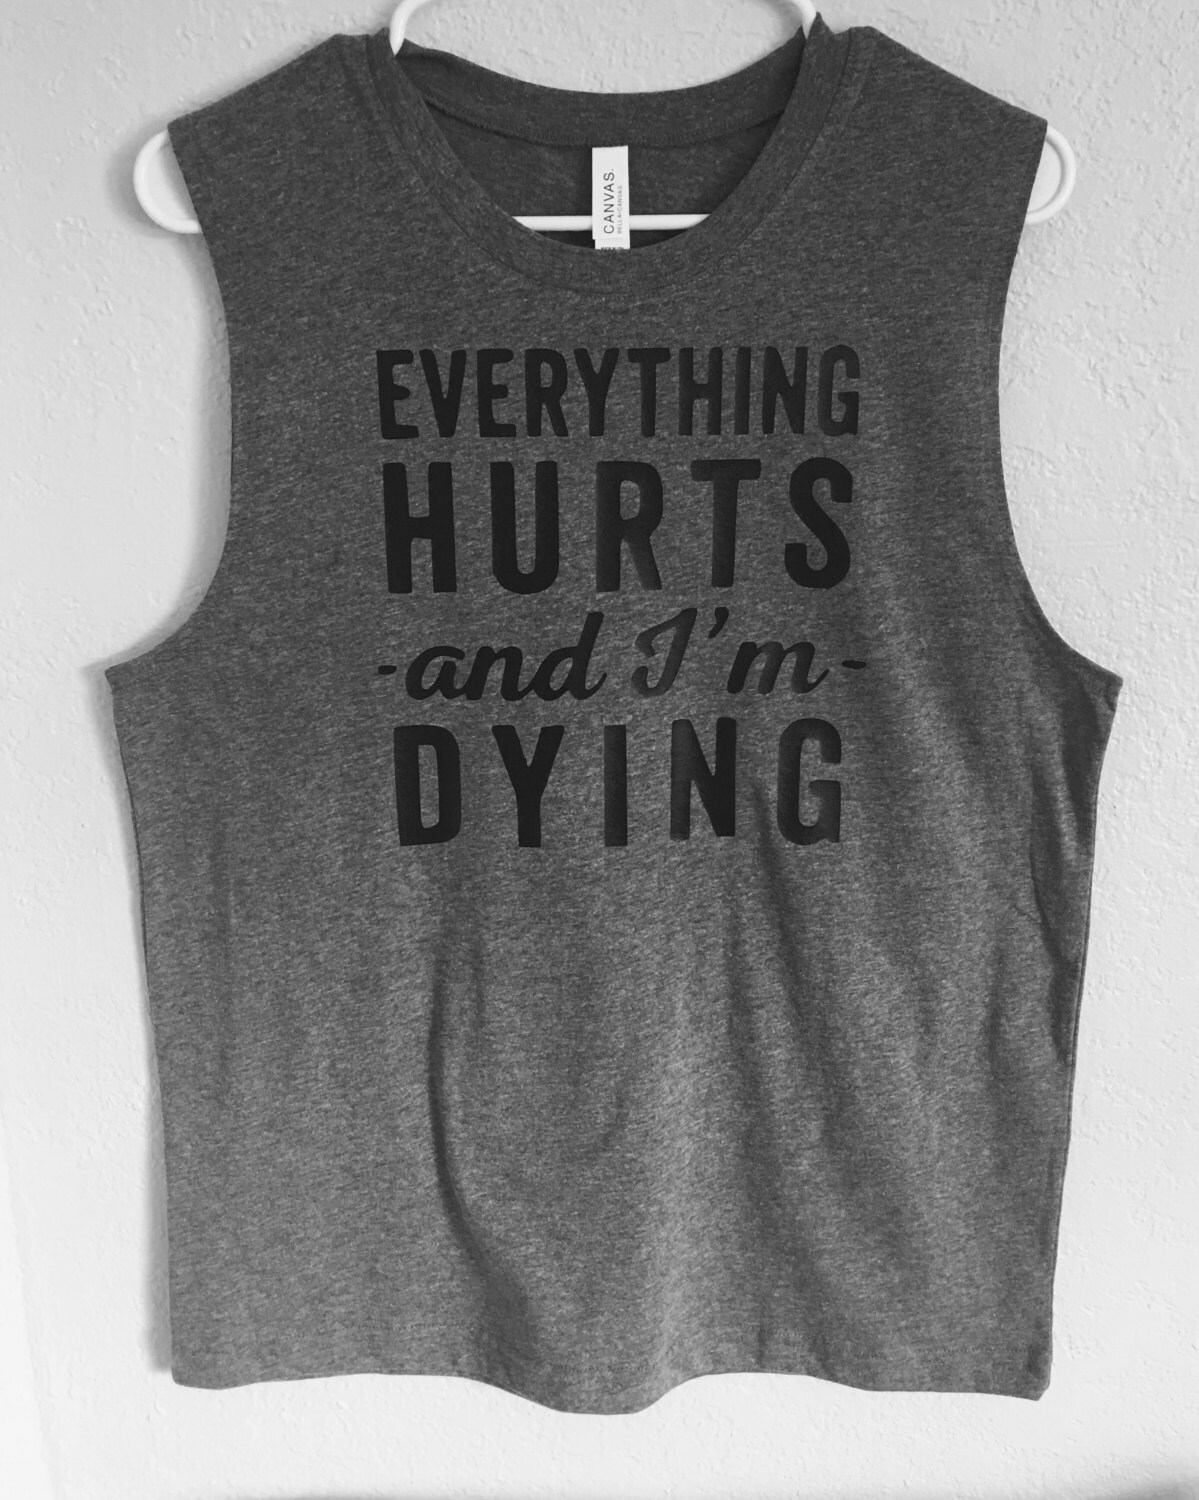 Everything Hurts and I'm Dying Shirts to exercise